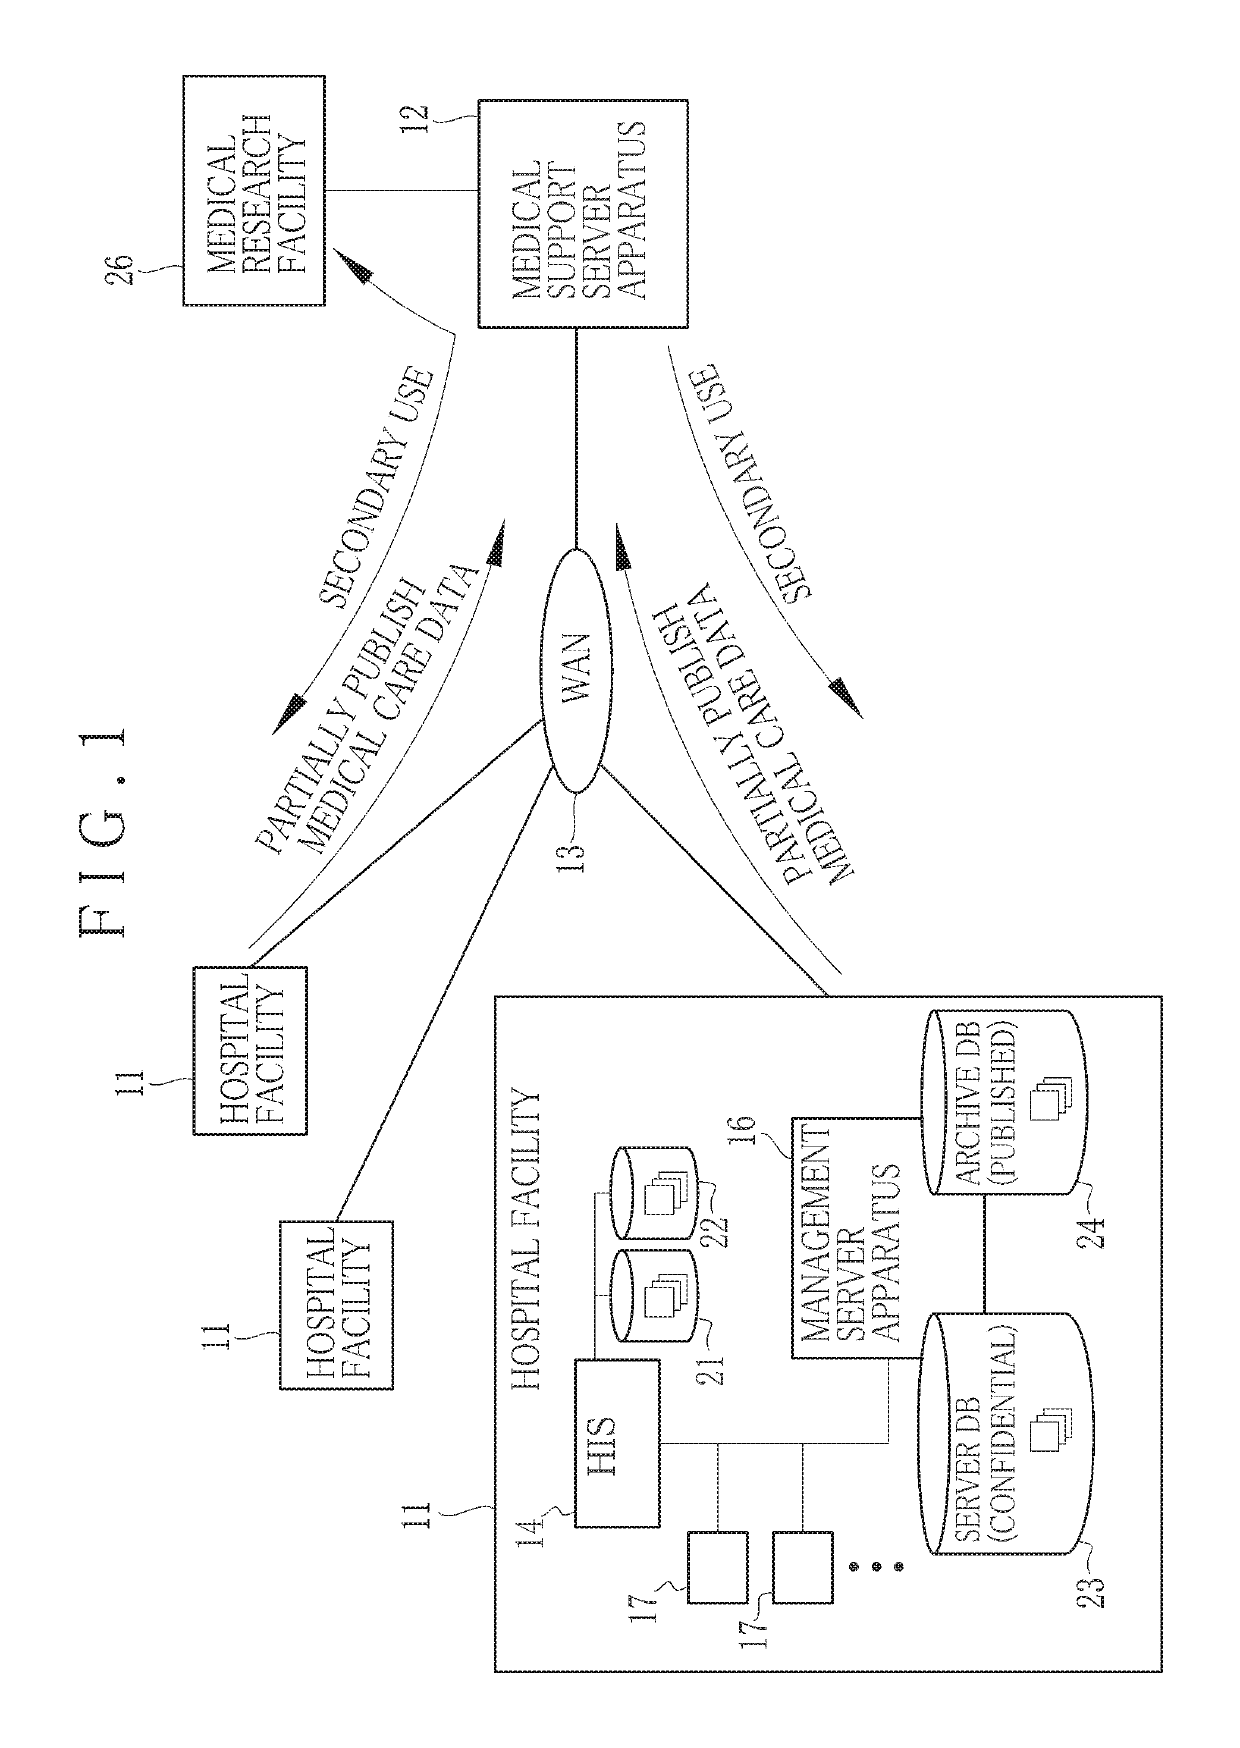 Information management apparatus and method for medical care data, and non-transitory computer readable medium